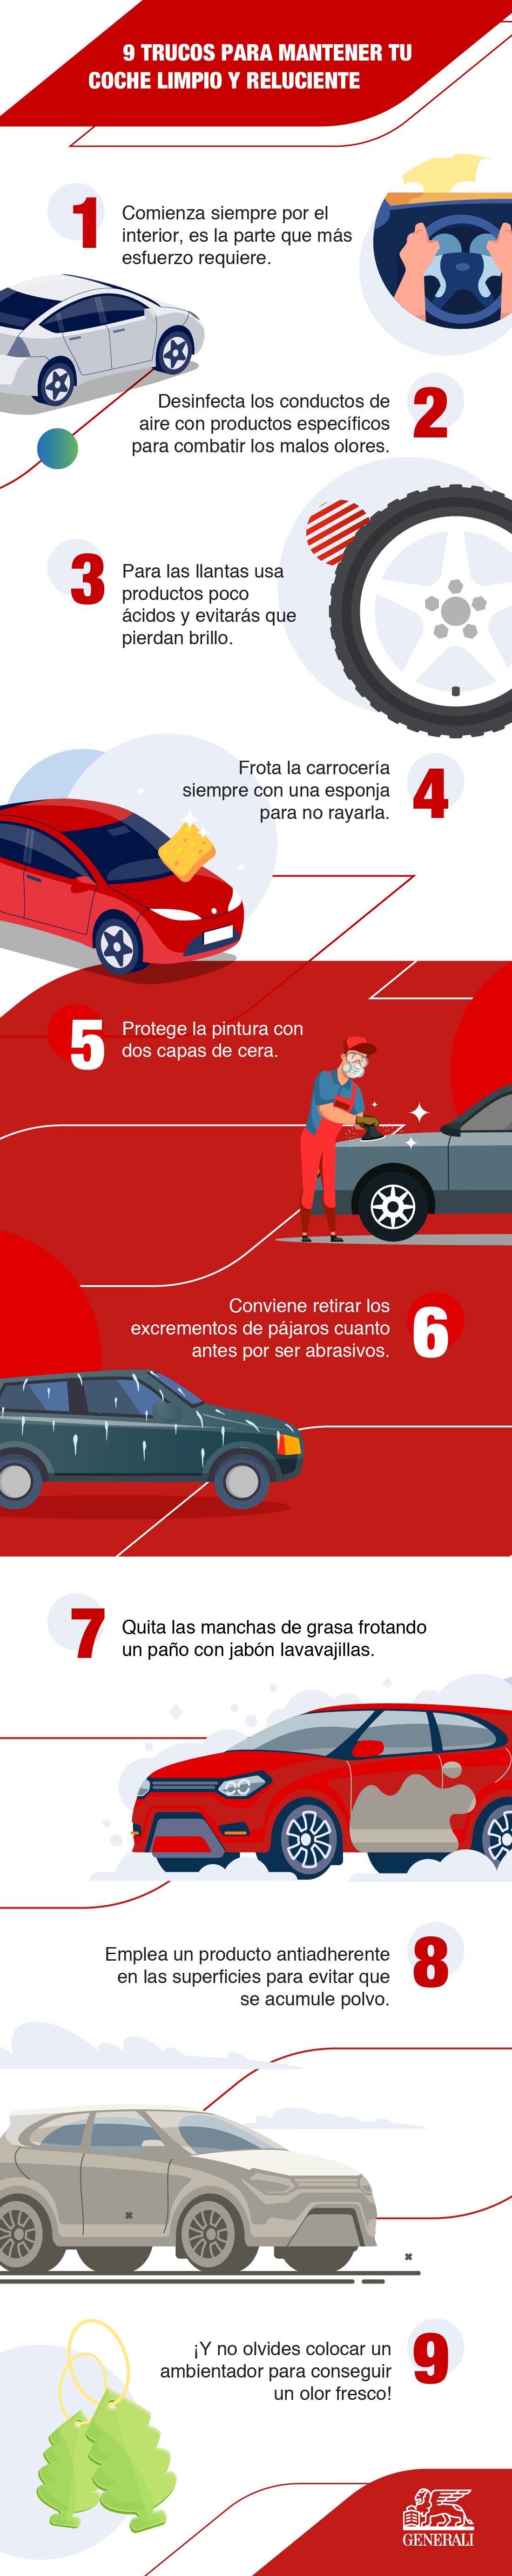 Generali-Spain-Infographic-How-To-Clean-Your-Car.jpg